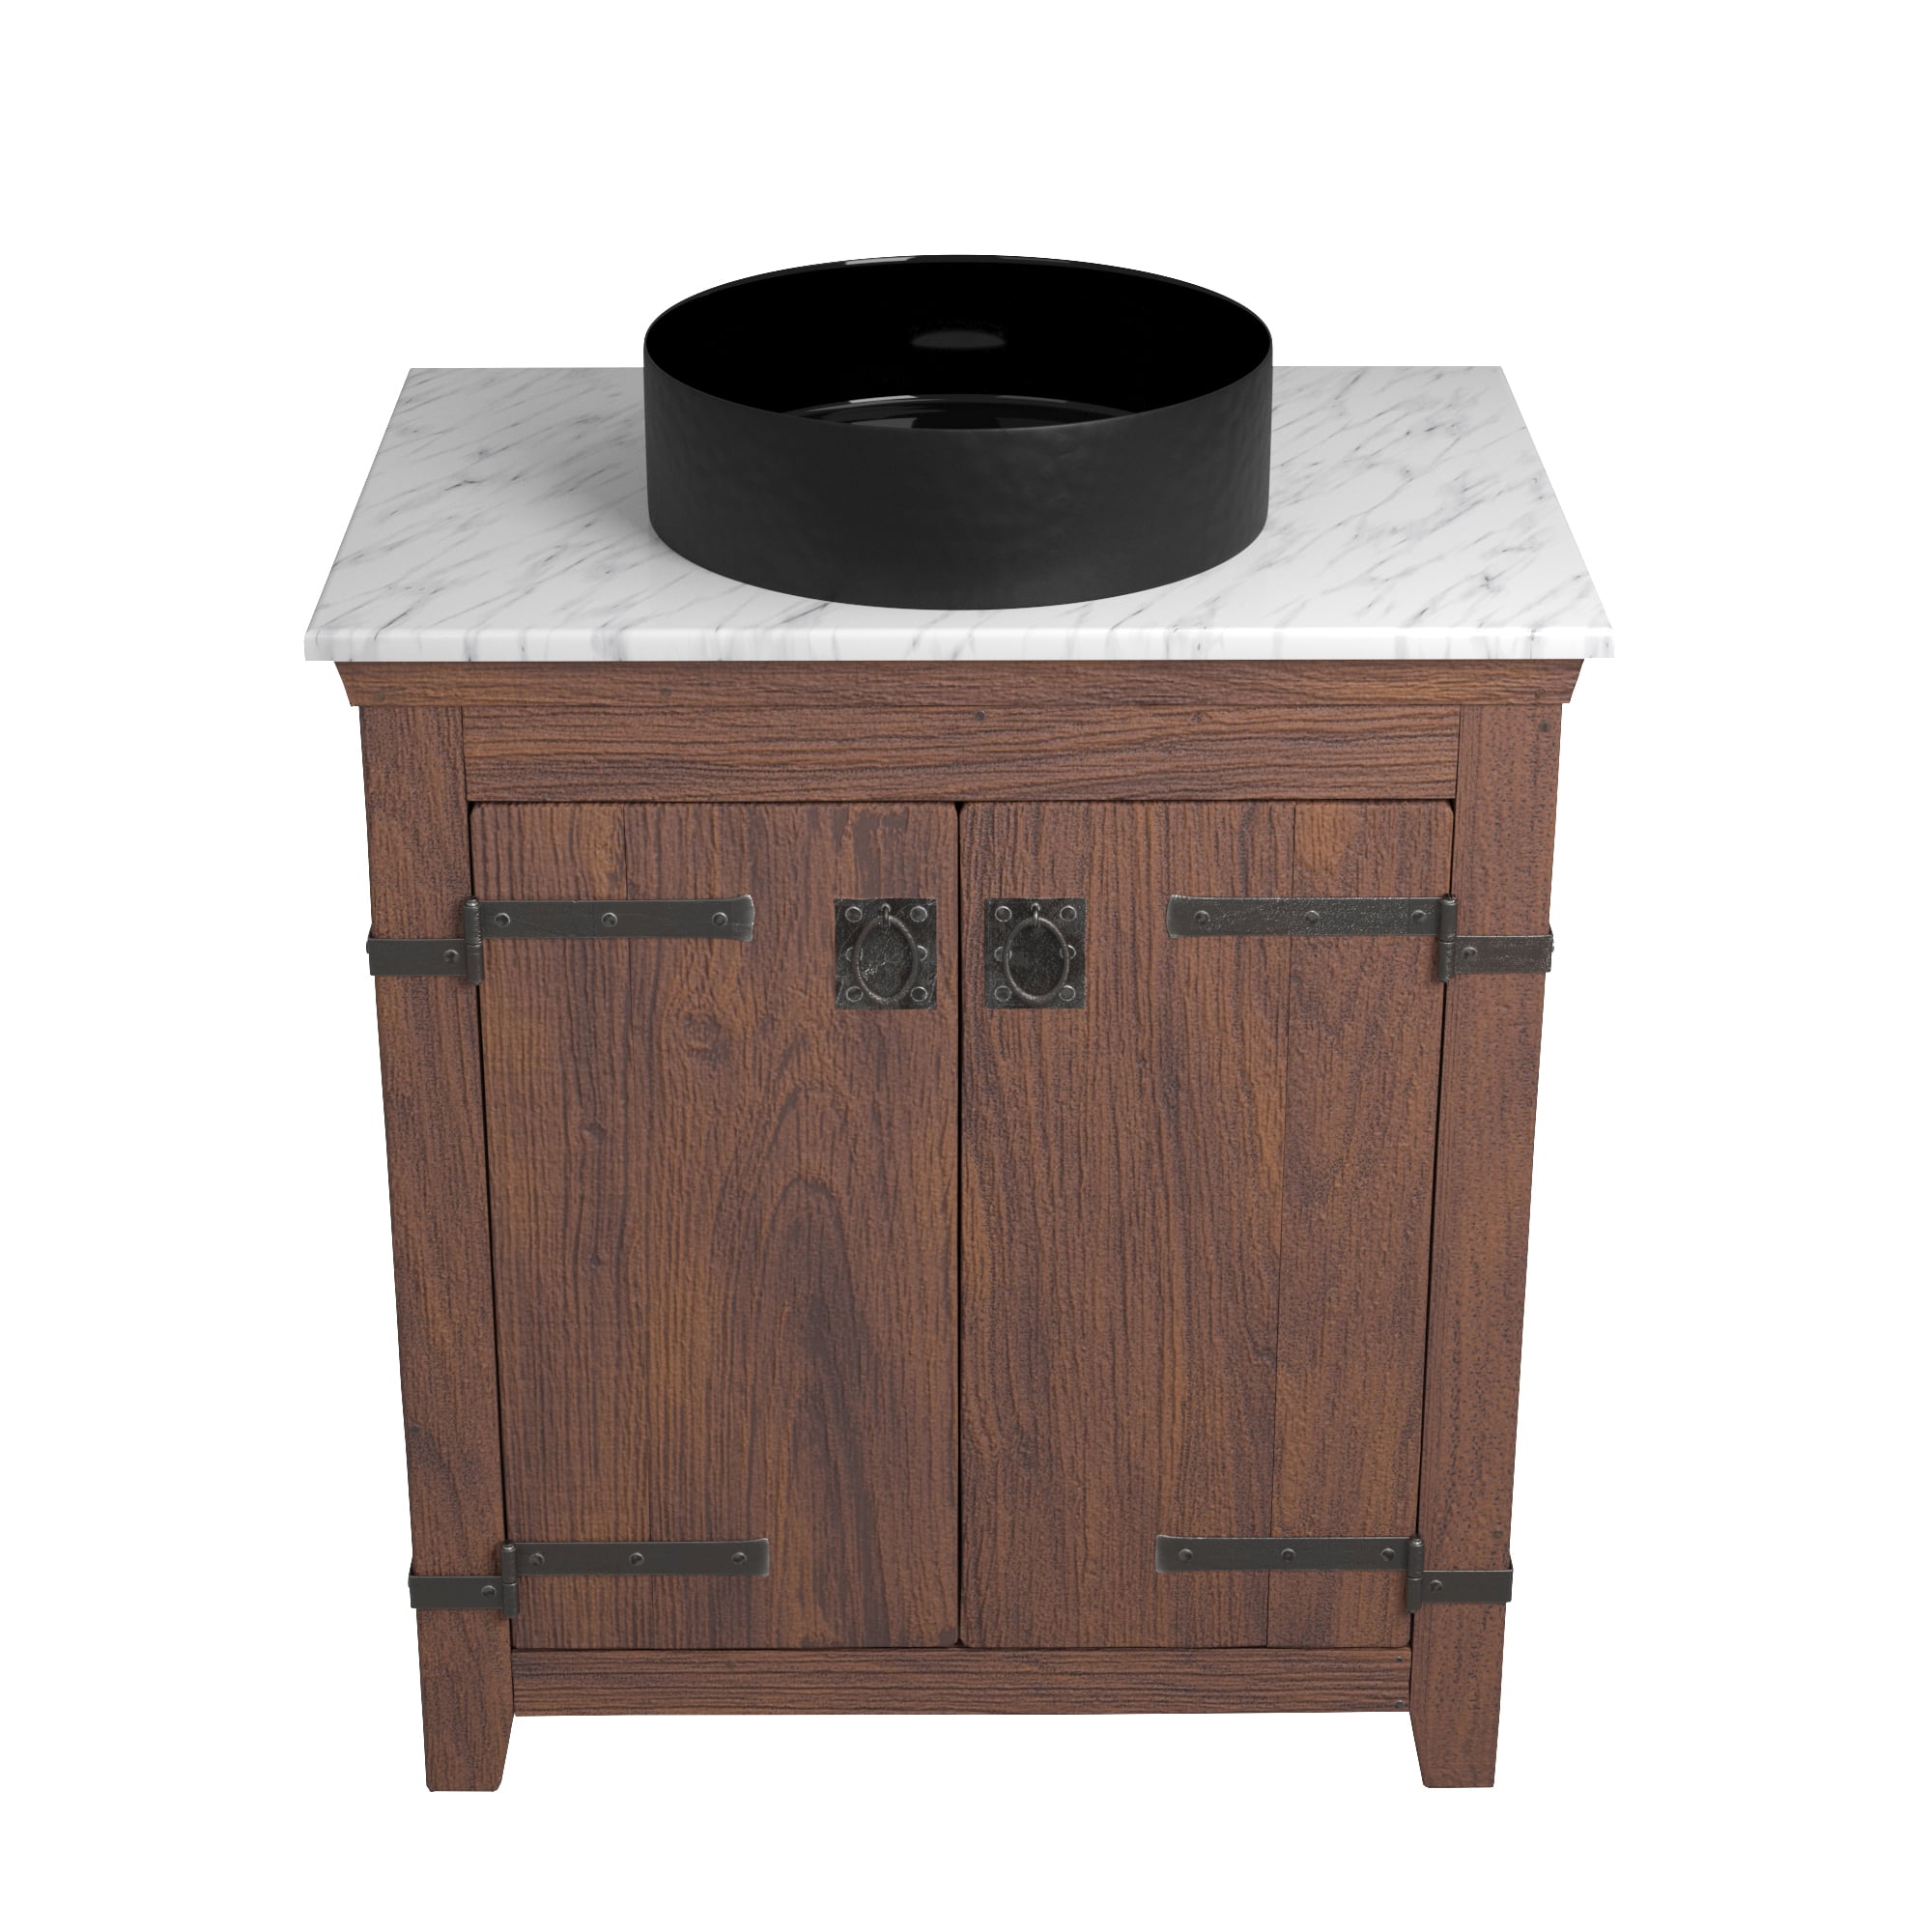 Native Trails 30" Americana Vanity in Chestnut with Carrara Marble Top and Positano in Abyss, Single Faucet Hole, BND30-VB-CT-MG-043